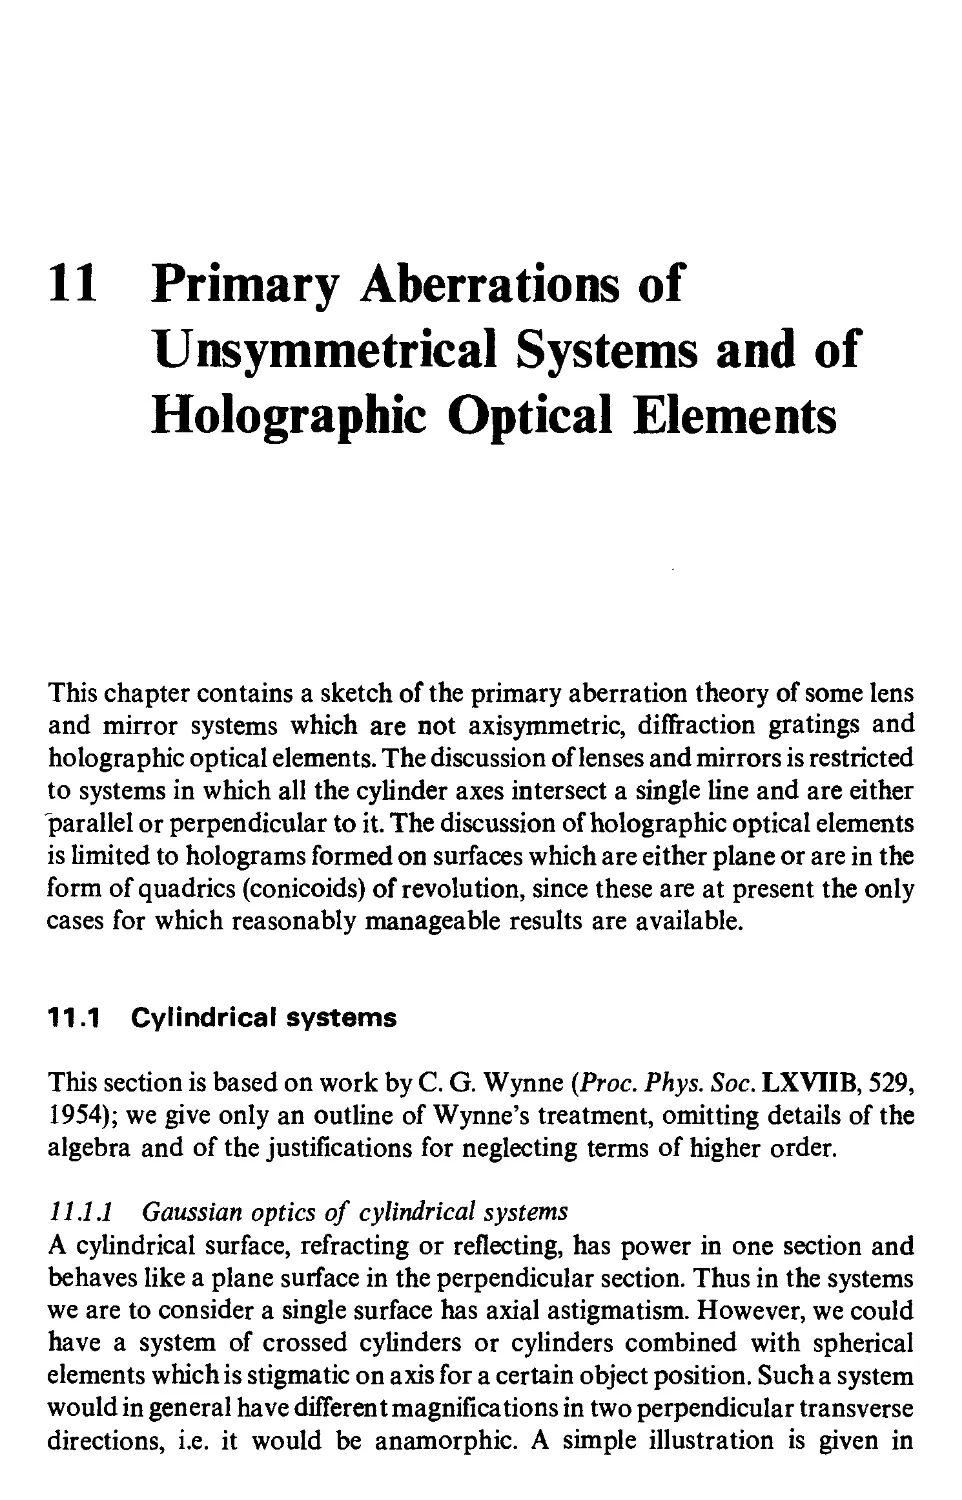 11 Primary aberrations of unsymmetrical systems and of holographic optical elements